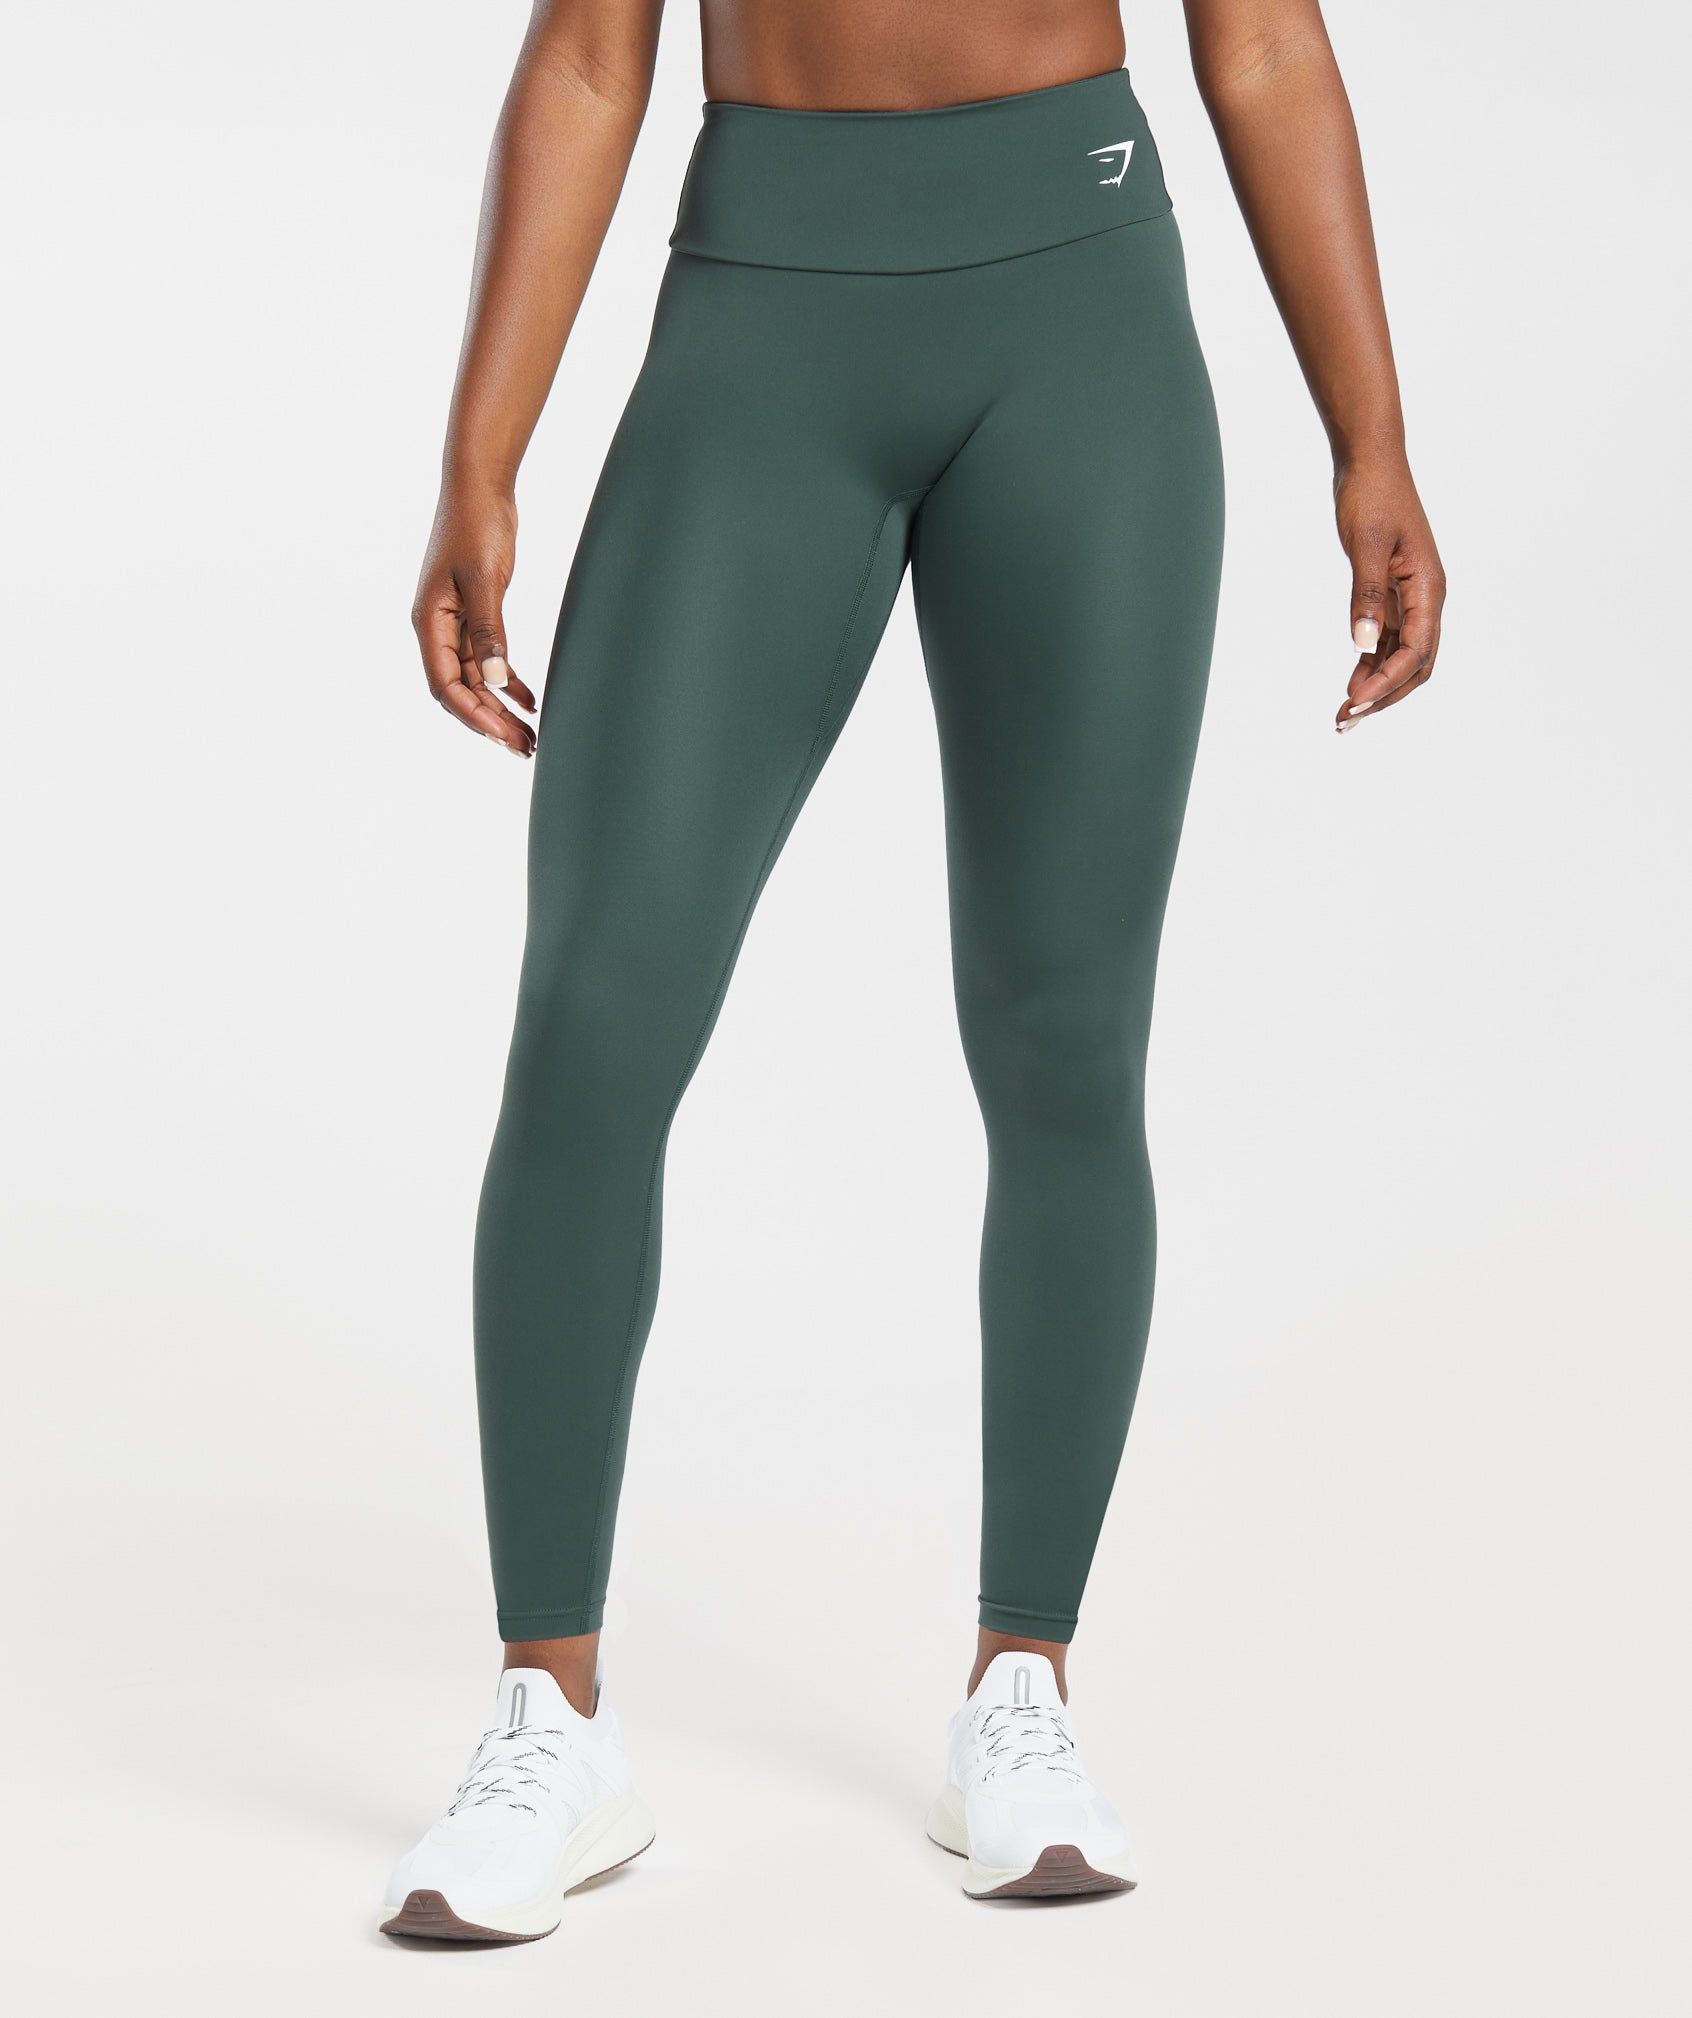 Gymshark Training Leggings Review 2021  International Society of Precision  Agriculture